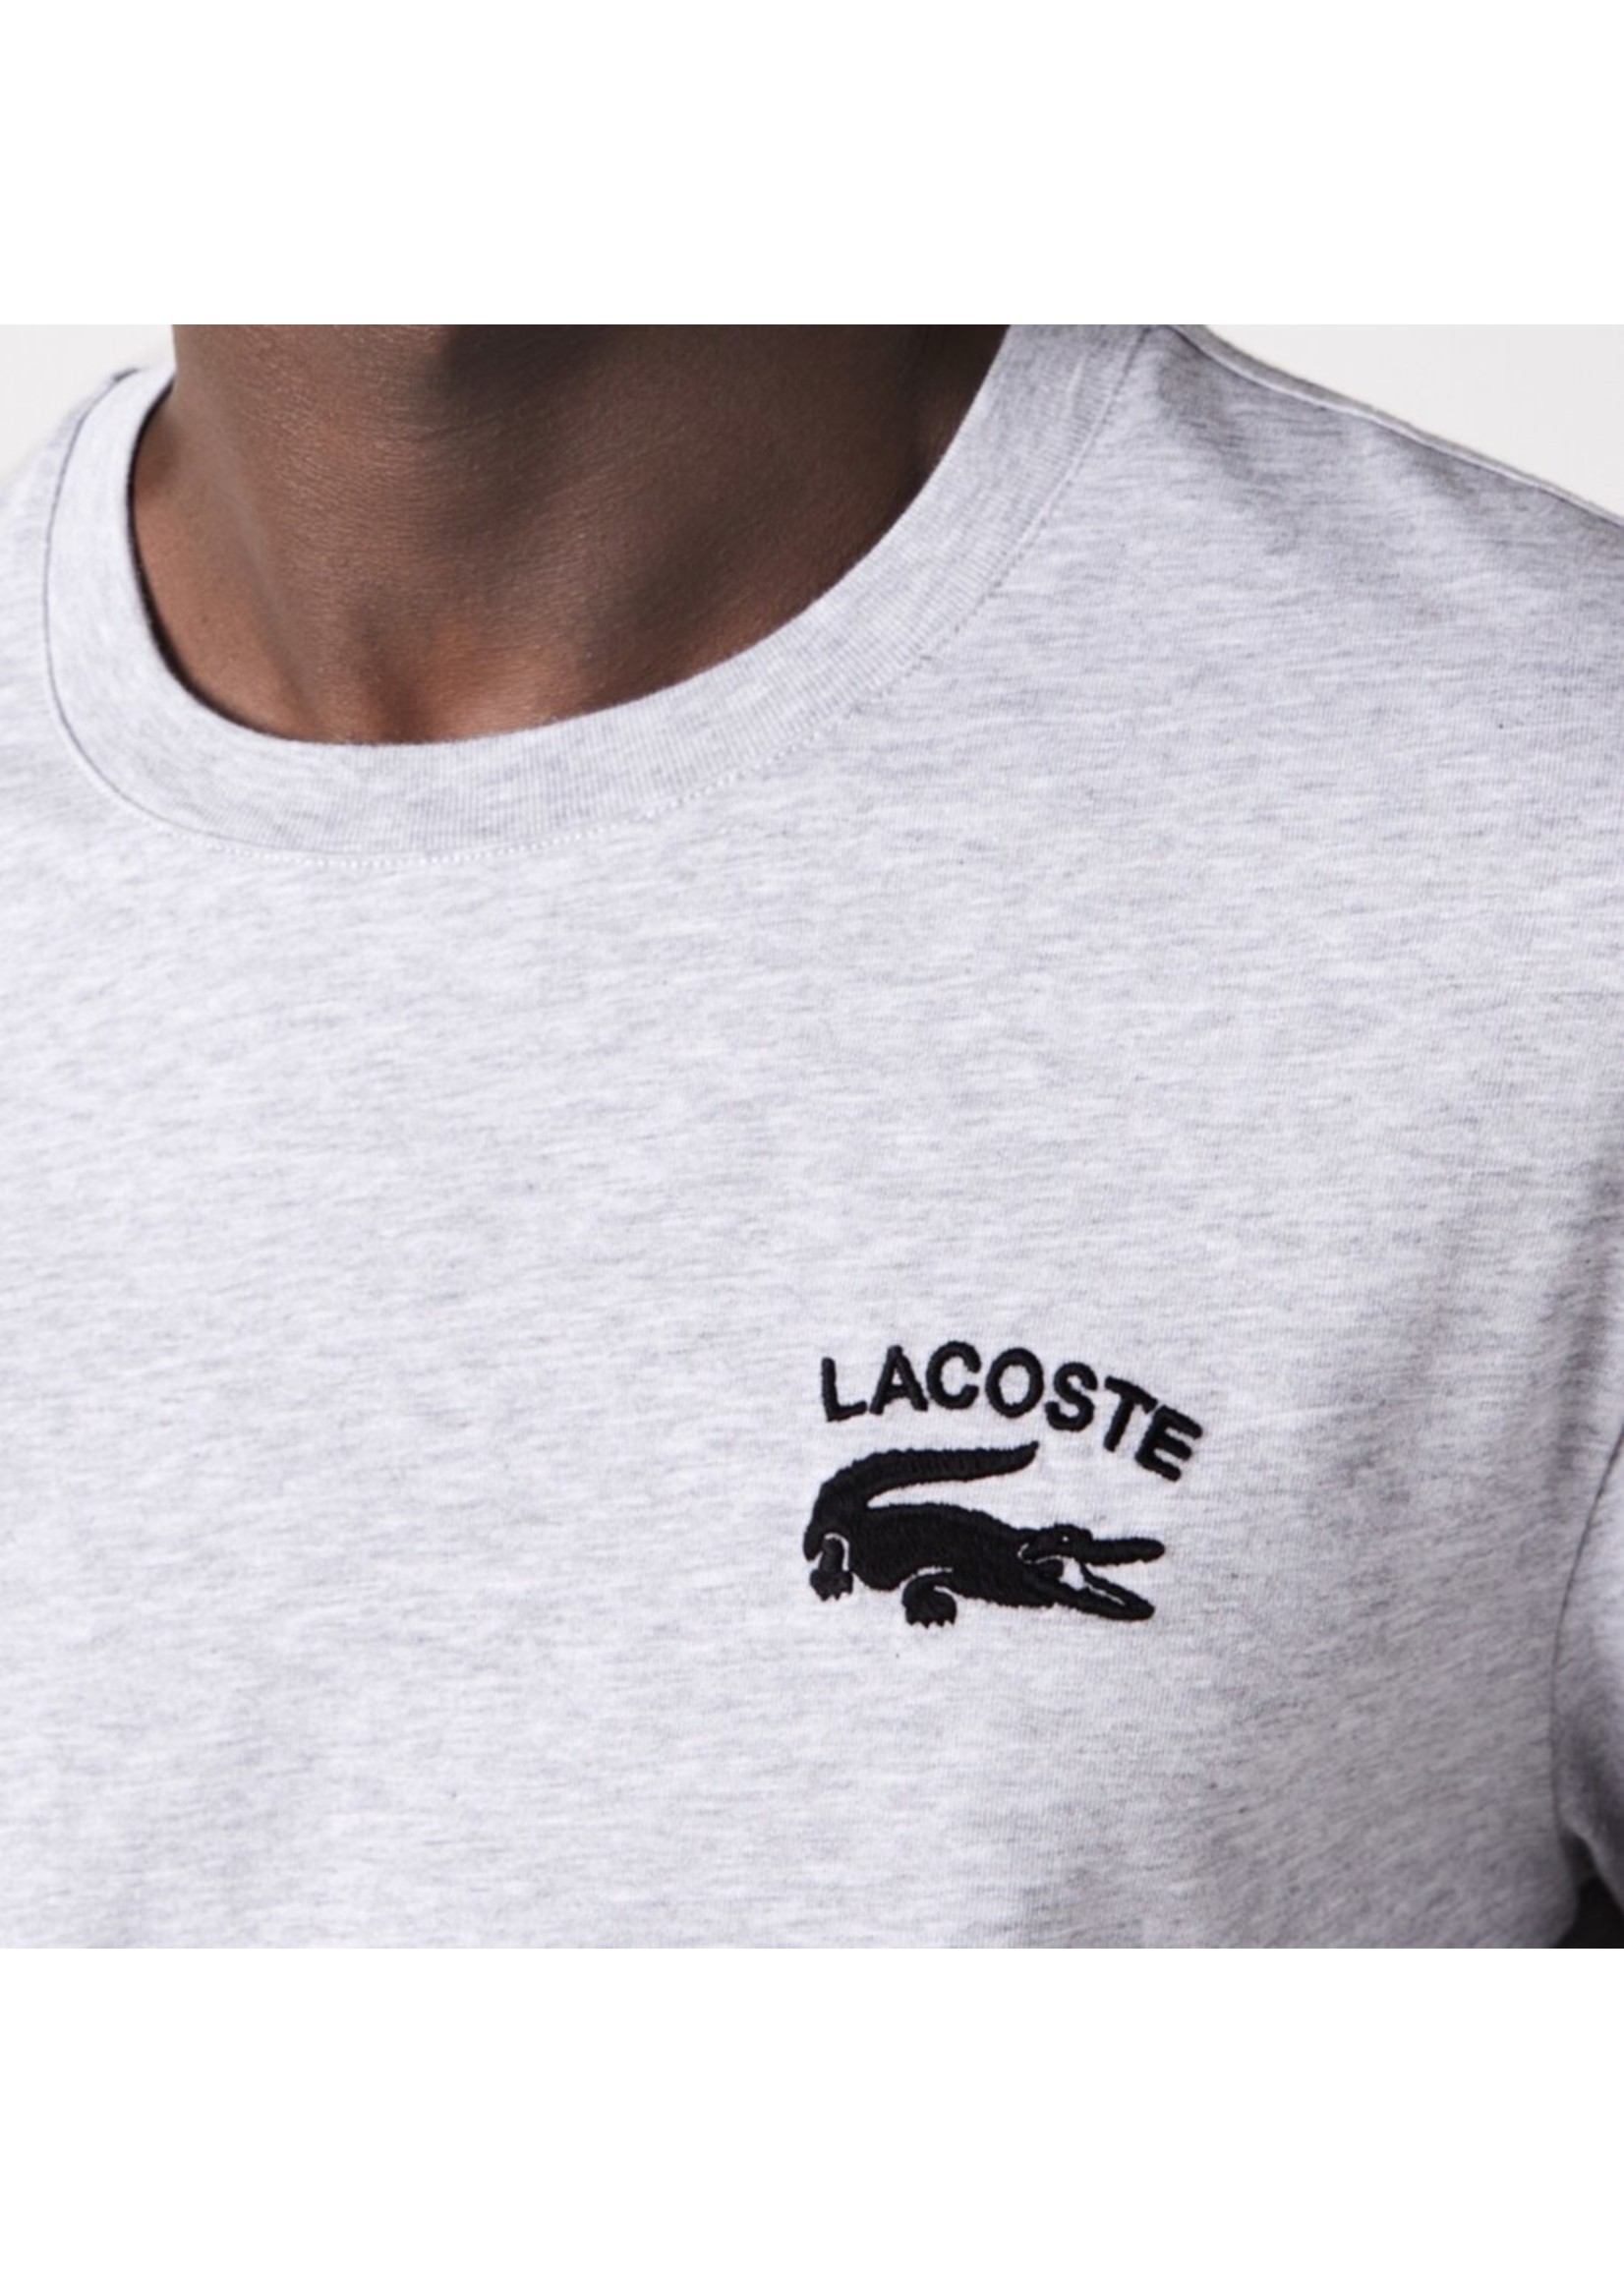 Lacoste Cotton Jersey FW22